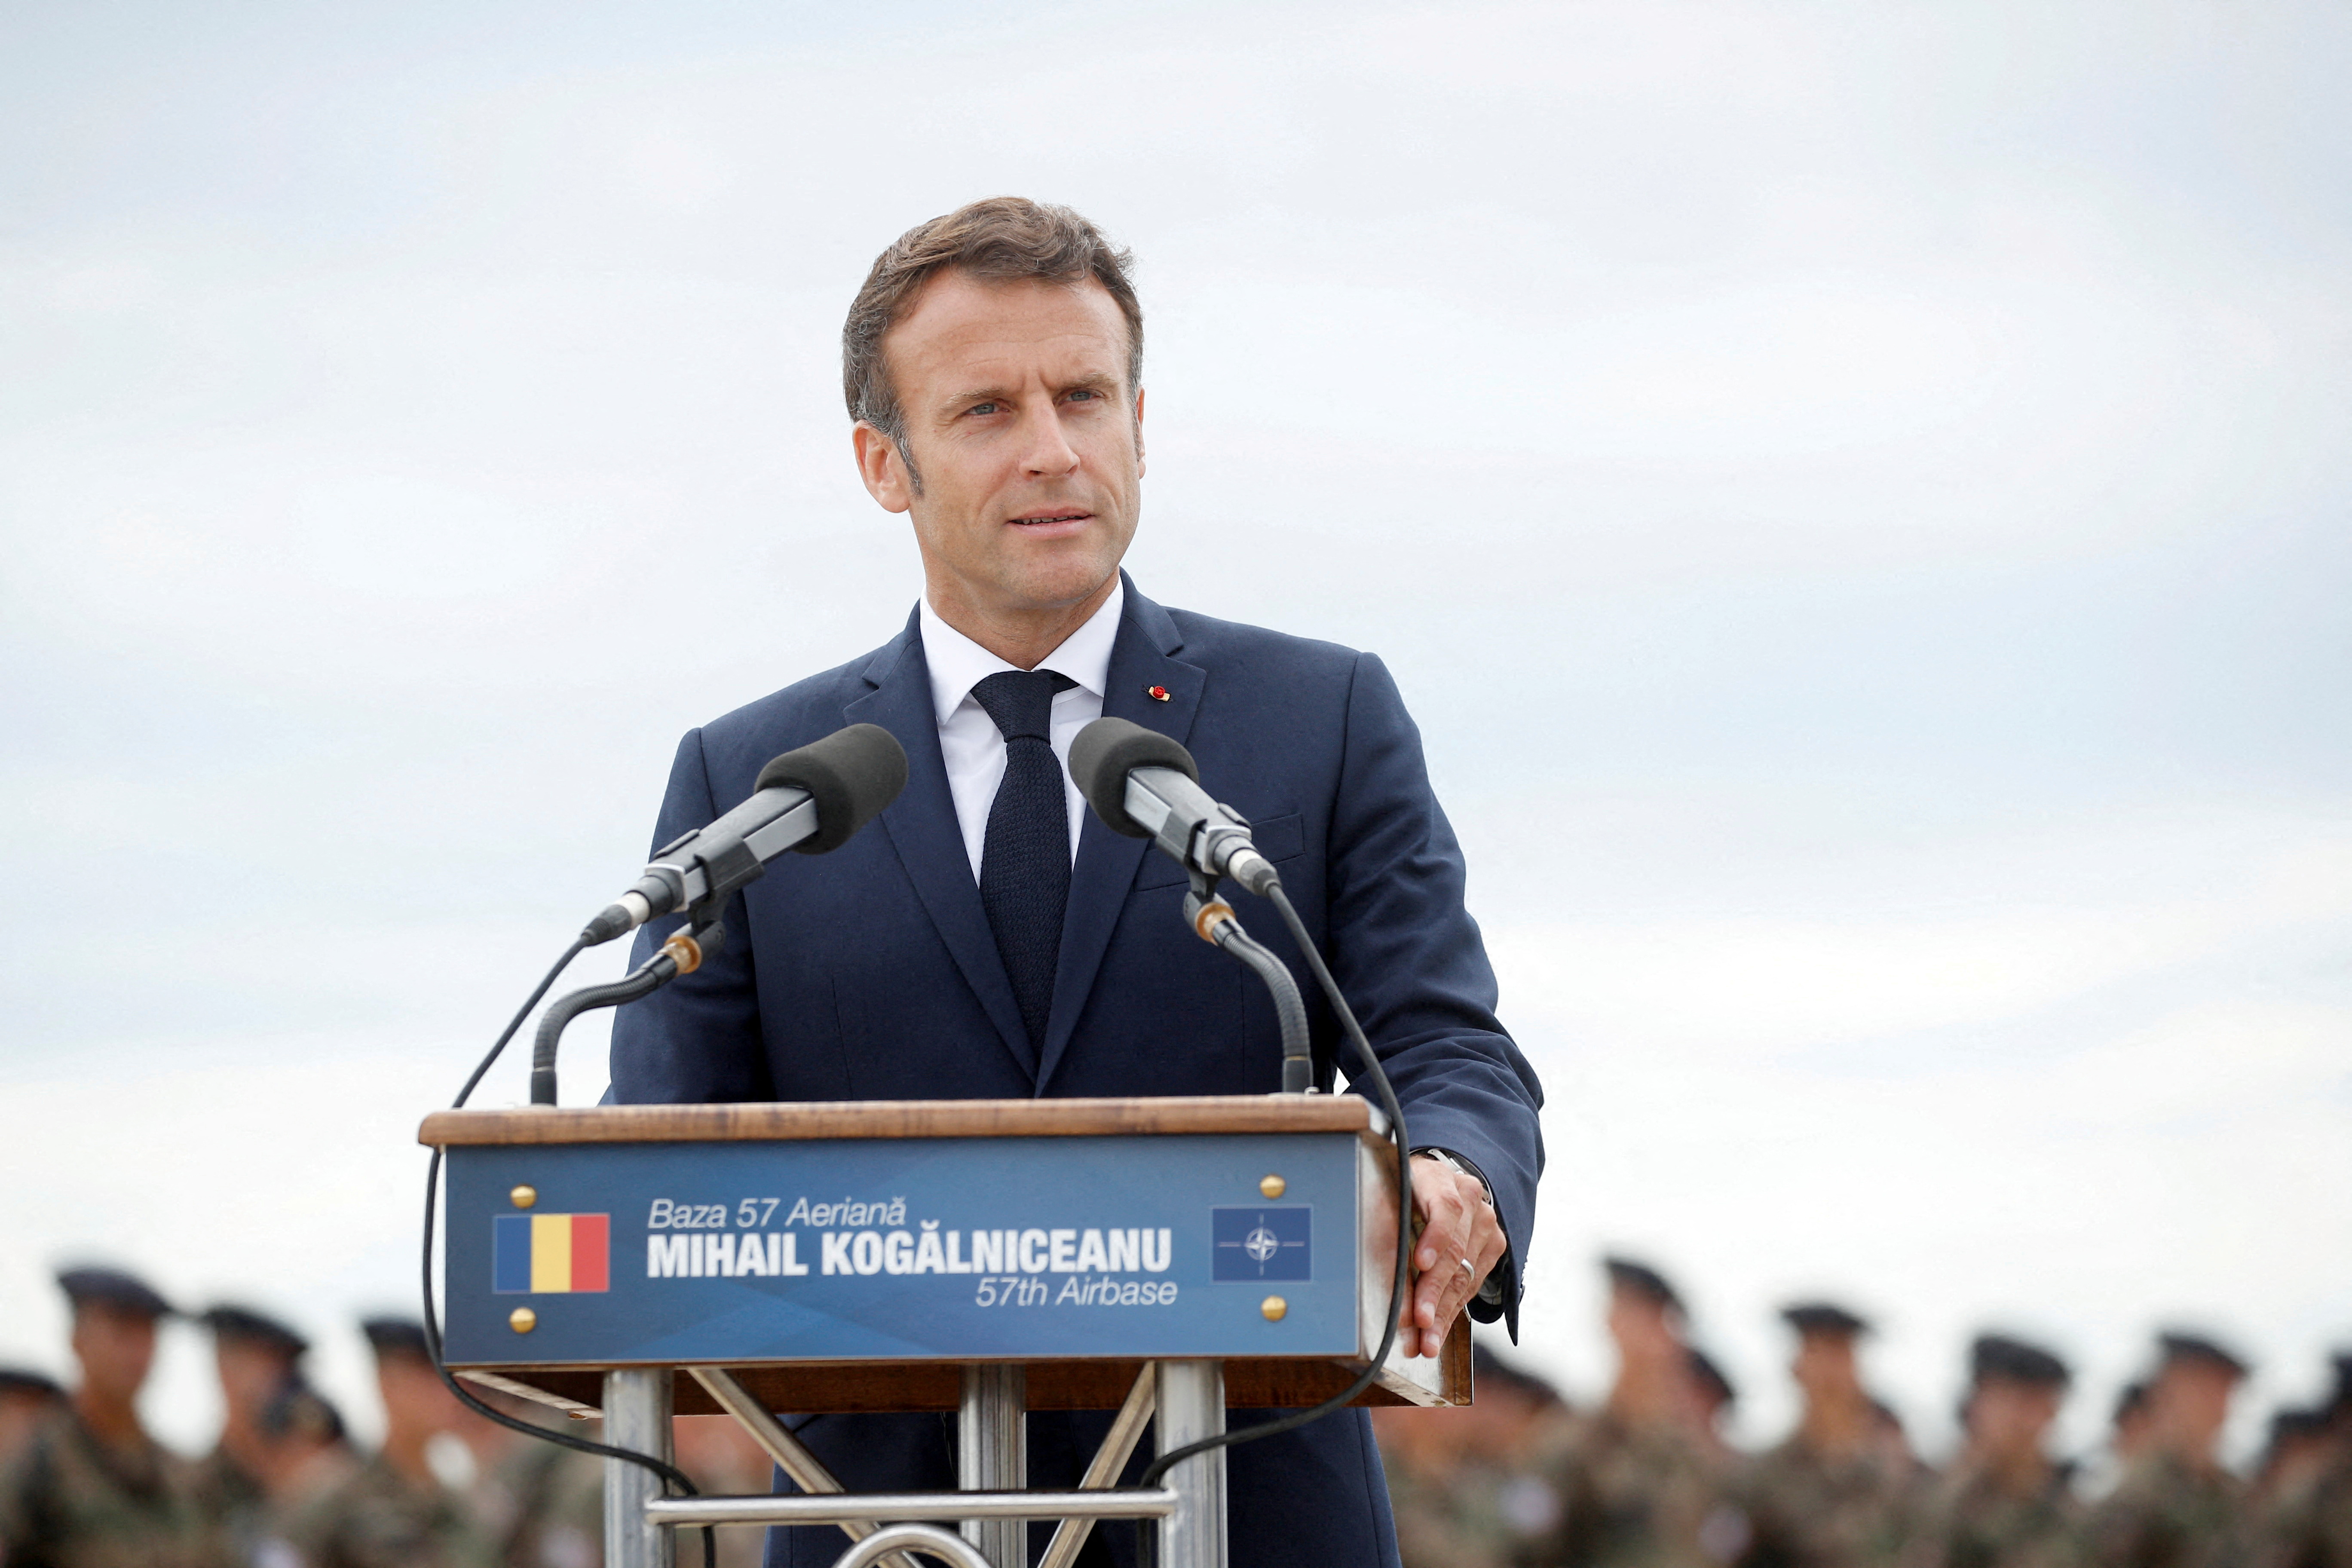 French President Macron meets Romanian counterpart Iohannis at NATO base in Romania